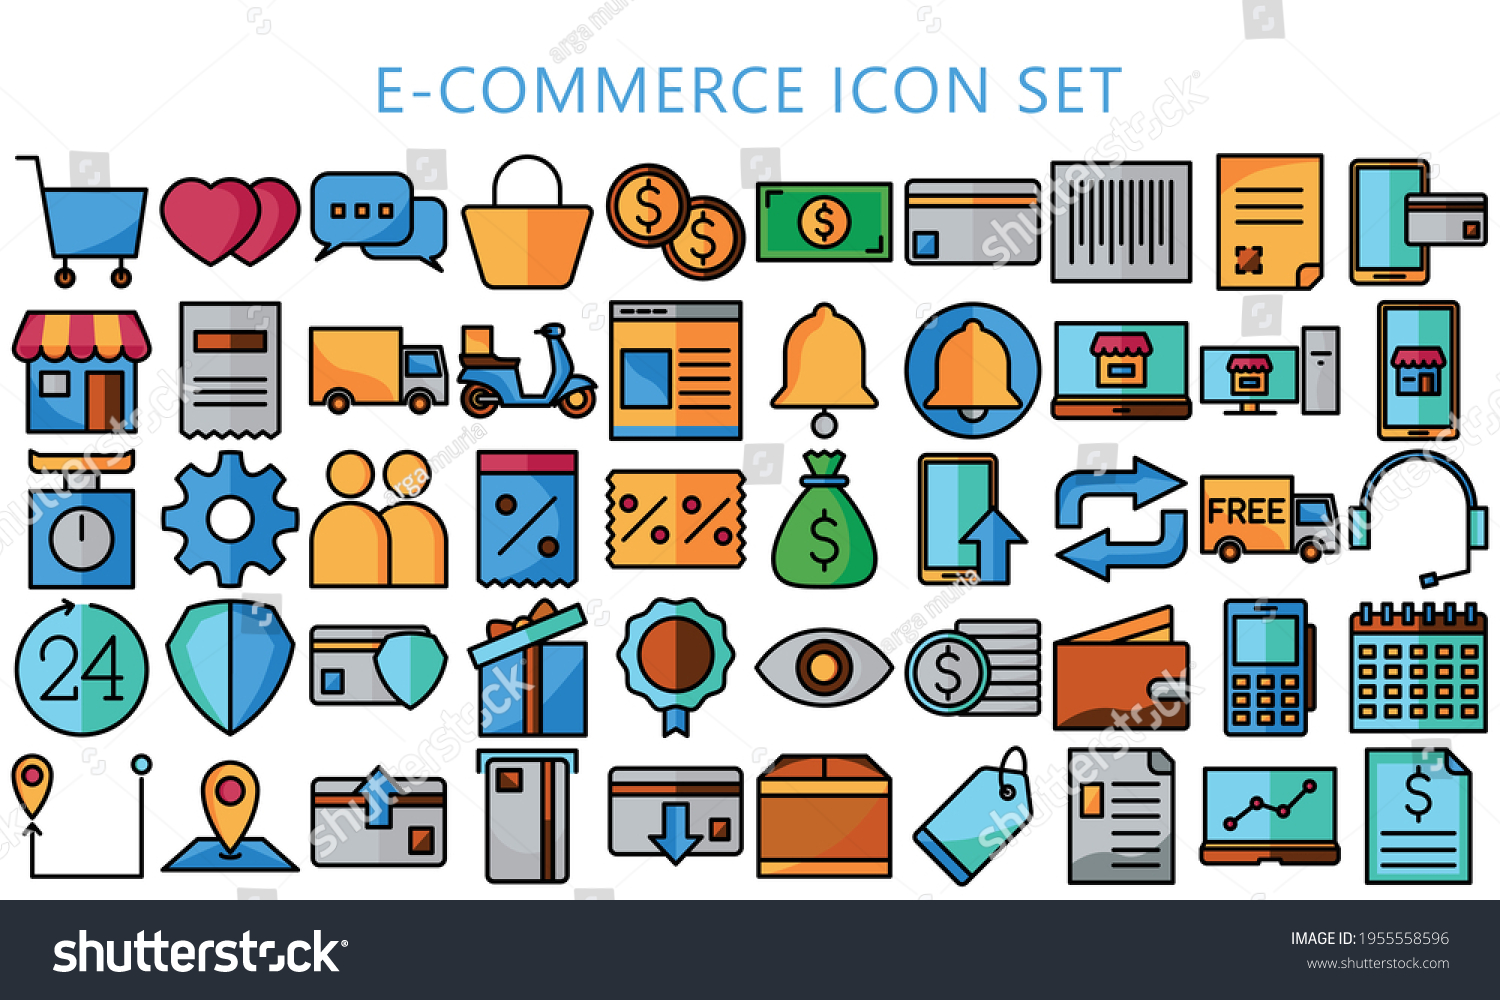 SVG of E-commerce business and Online shopping icons collection set, multi color with black outline design for application and websites on white background, Vector illustration EPS 10 ready convert to SVG svg